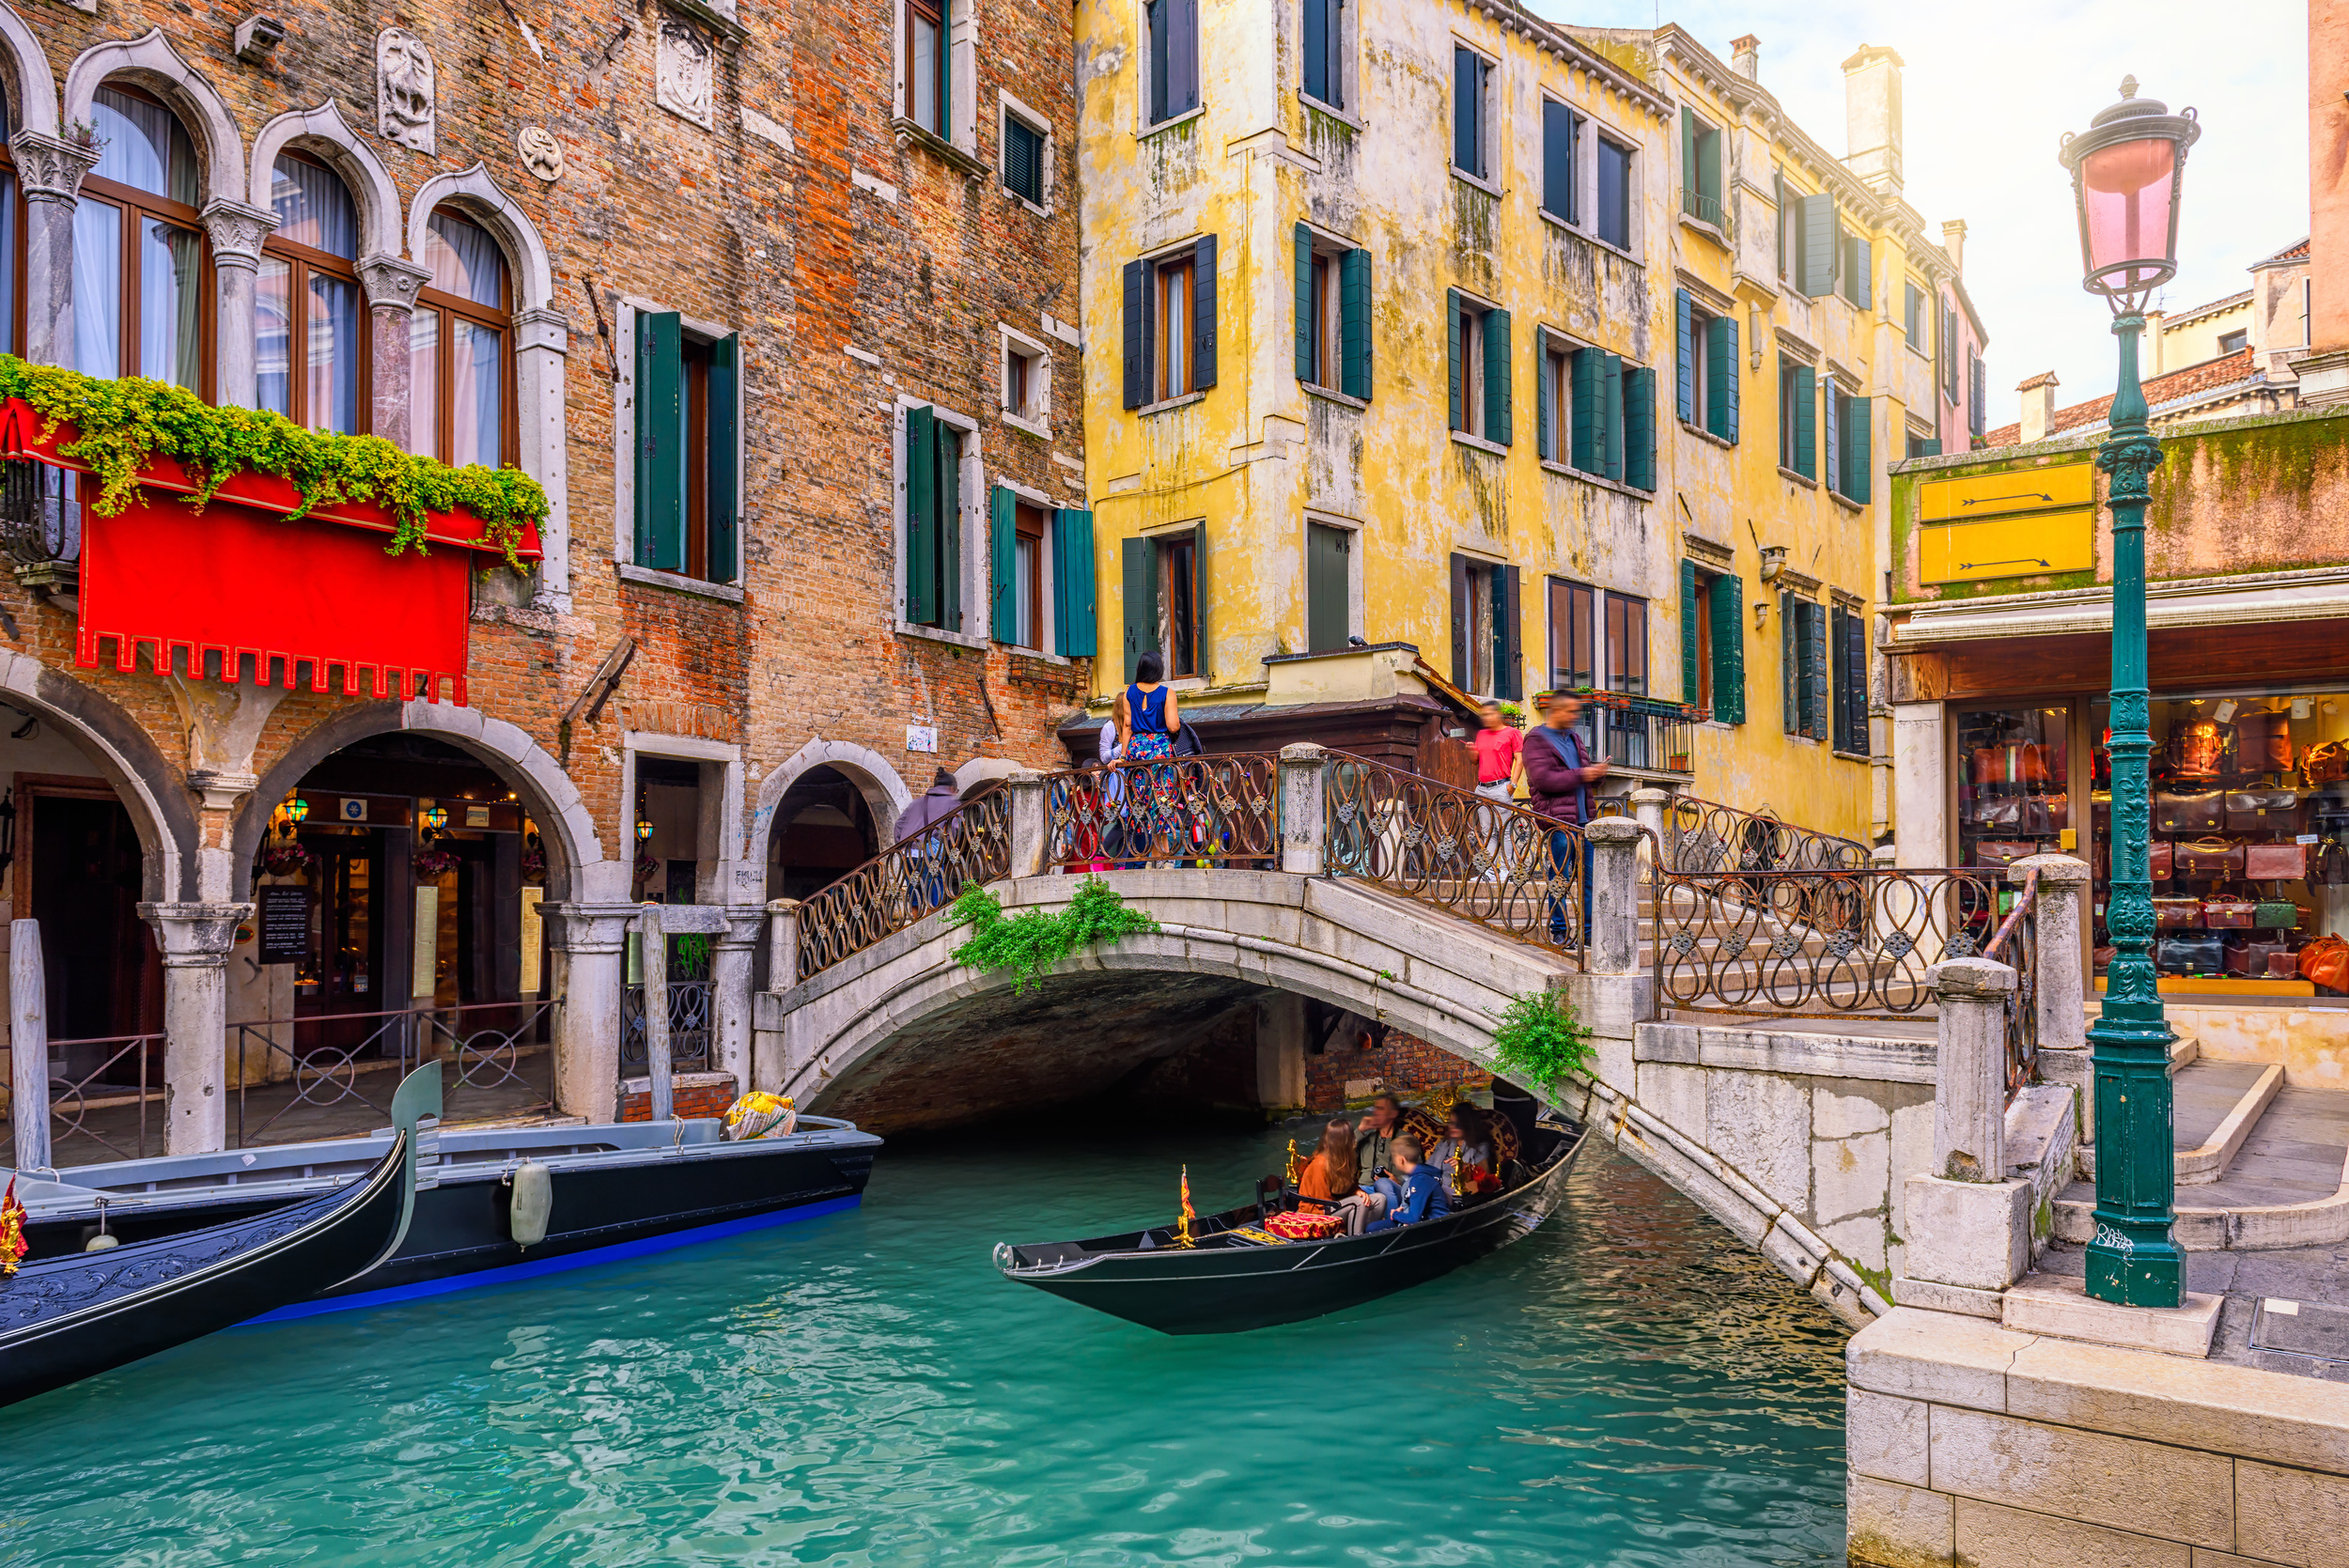 <p>Okay, a trip to Venice likely conjures up visions of gondola rides on the water. And you should definitely see the city that way. However, it’s also a great place to walk.</p><p><a href='https://www.msn.com/en-us/community/channel/vid-cj9pqbr0vn9in2b6ddcd8sfgpfq6x6utp44fssrv6mc2gtybw0us'>Follow us on MSN to see more of our exclusive lifestyle content.</a></p>